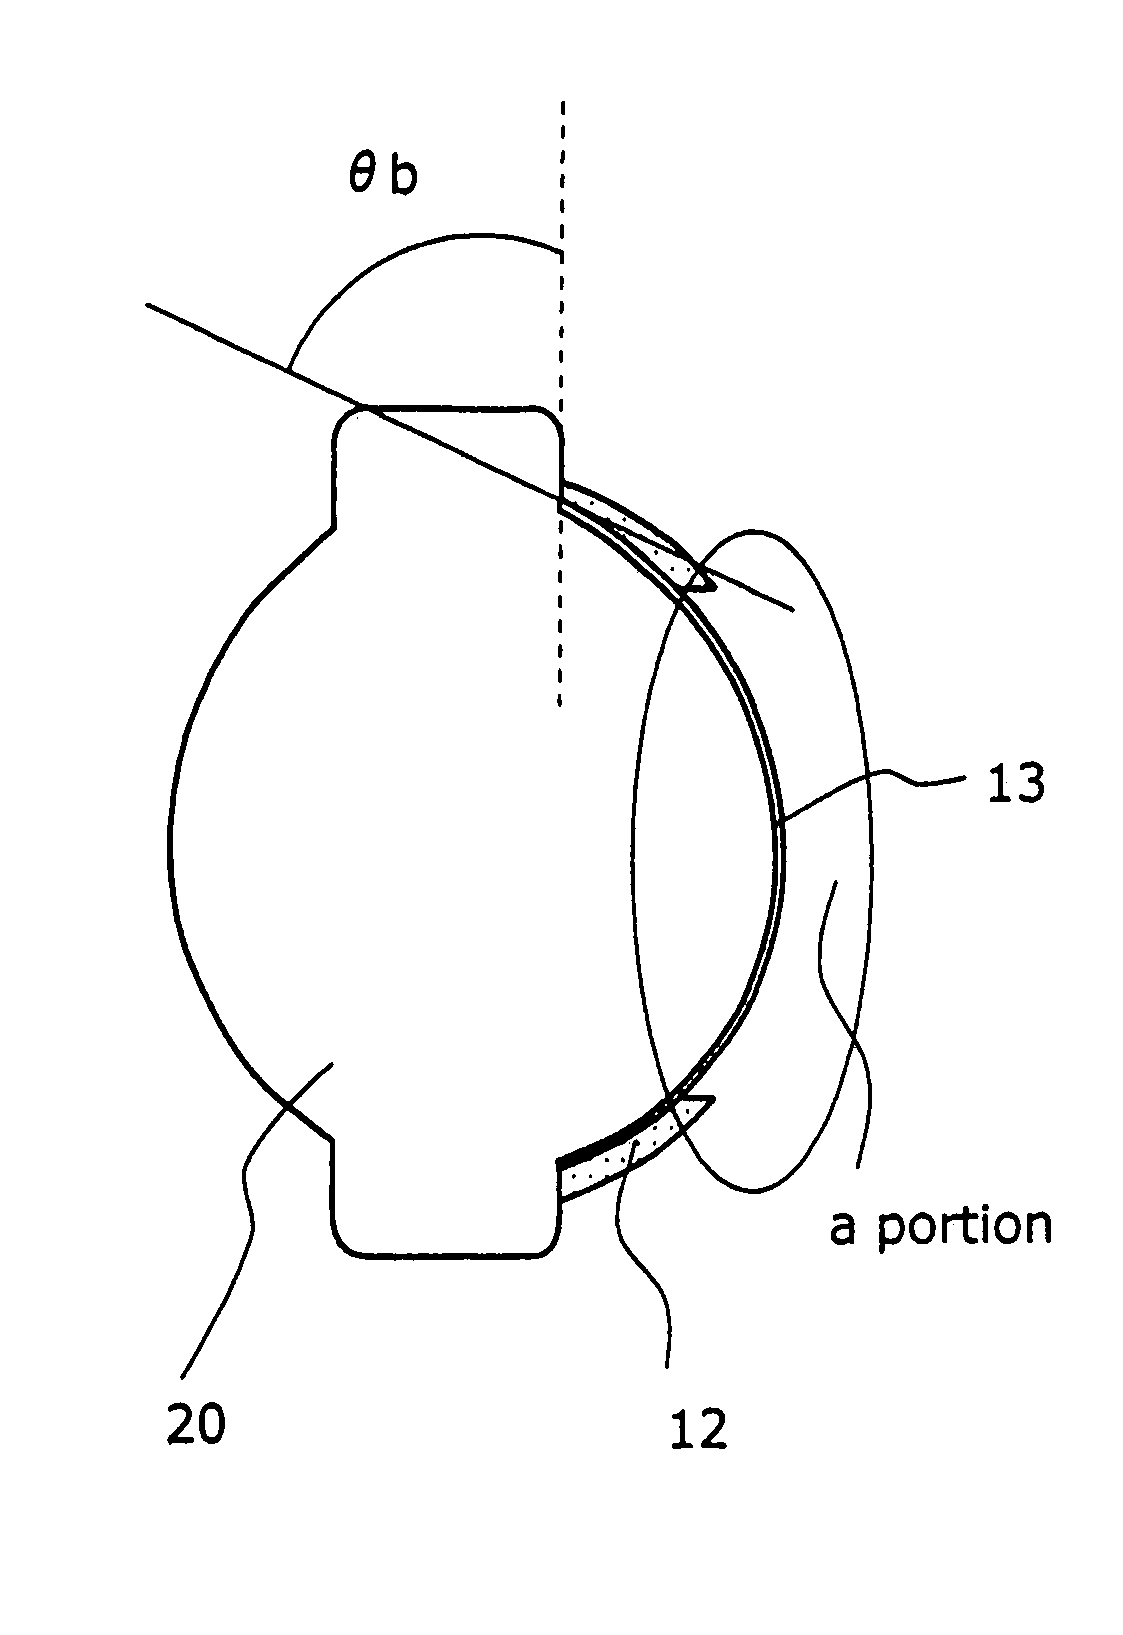 Optical lens having antireflective structure